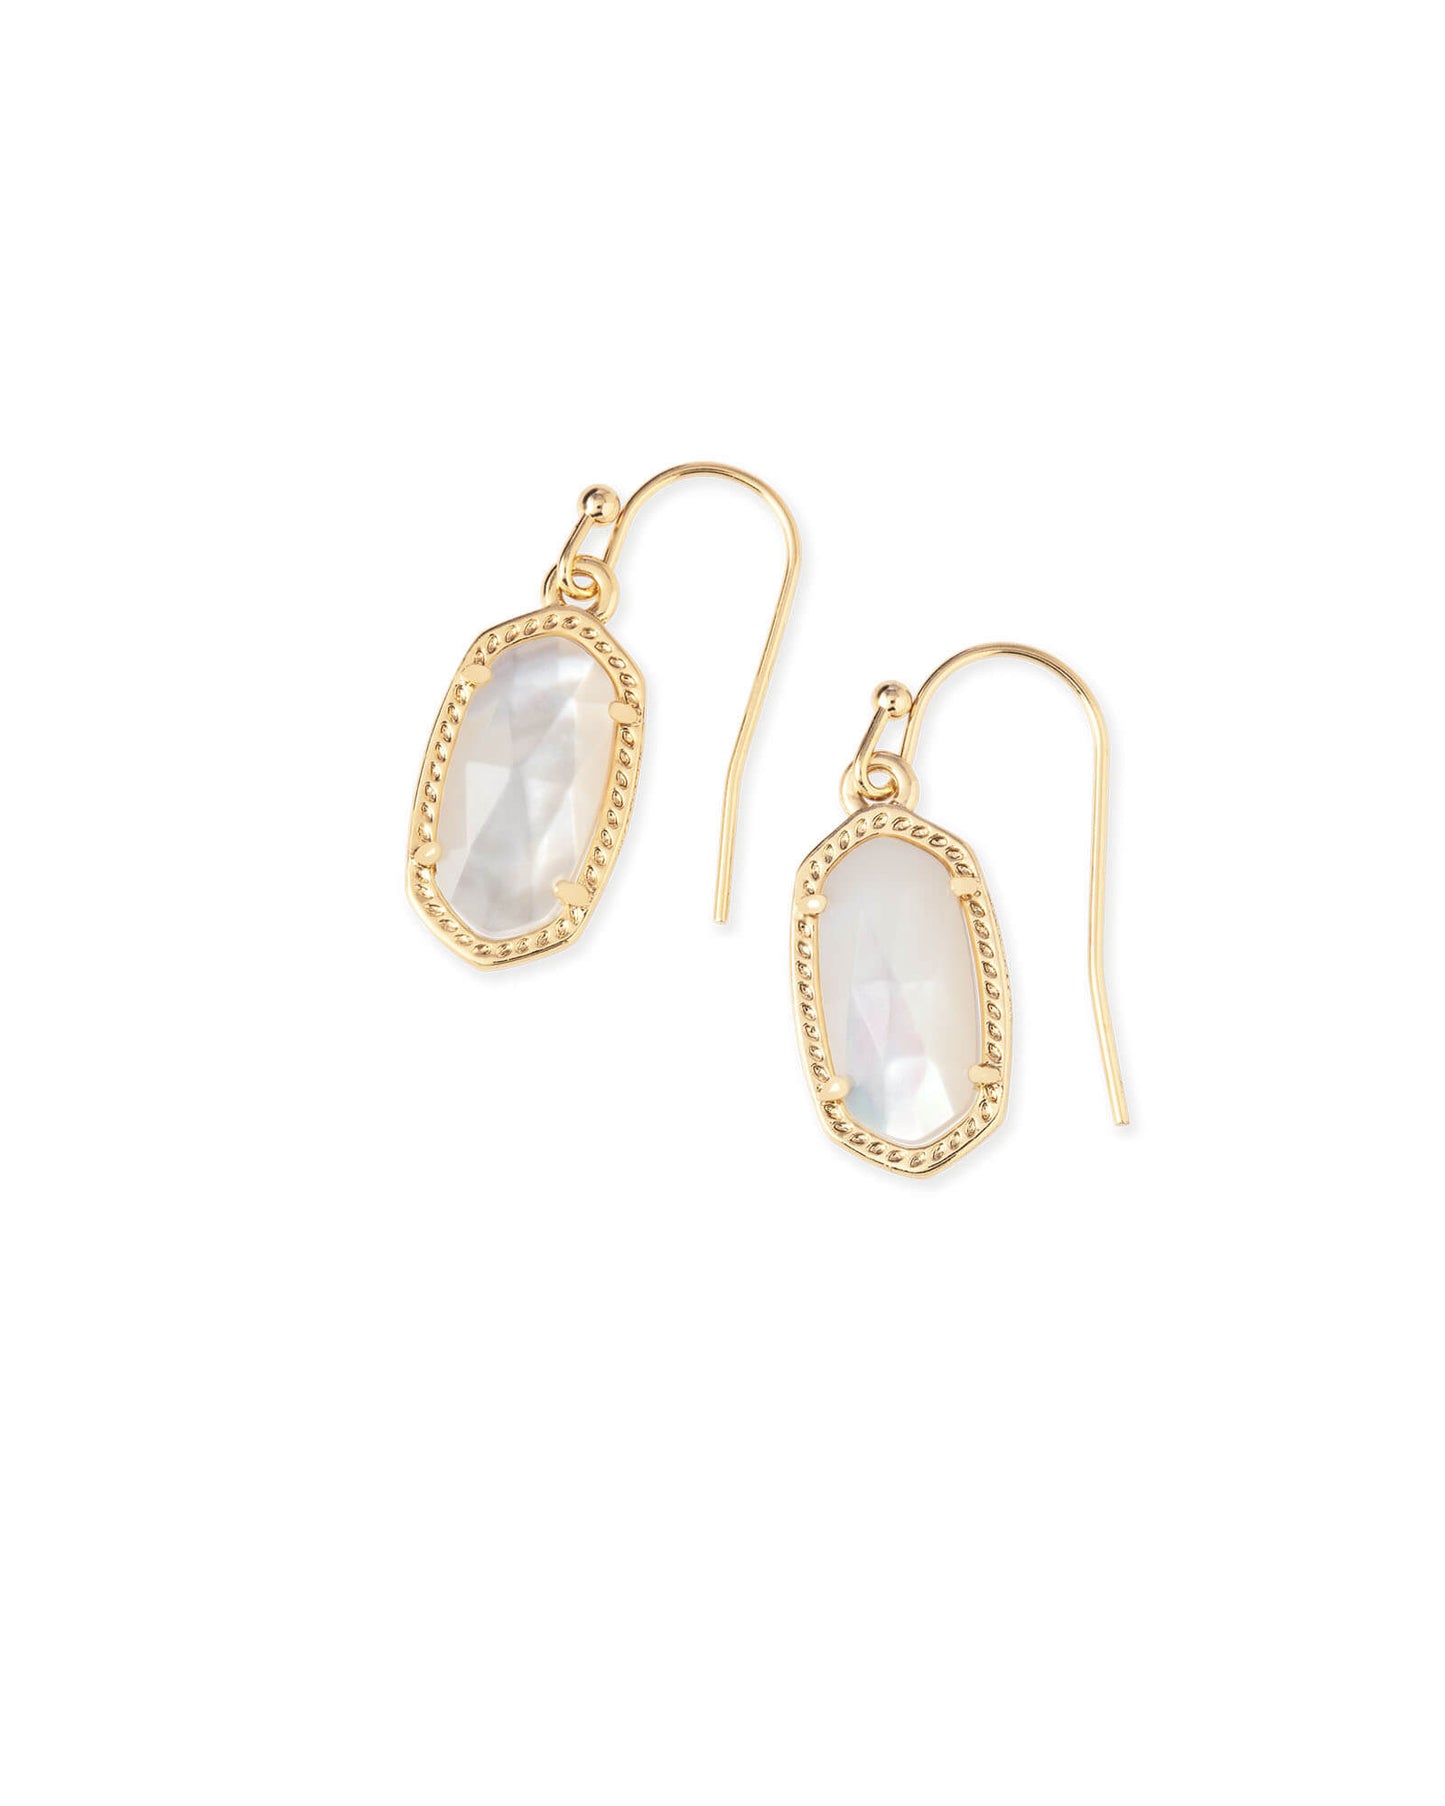 Our classic oval shape goes dainty in the Lee Drop Earrings, a subtle take on a signature style. These drop earrings are perfect for everyday wear, adding a touch of elegance to any outfit. We're certain that our Lee Drop Earrings will become a staple piece in your jewelry box.  Dimensions- 0.63'L x .38'W on ear wire Metal- 14k Yellow Gold Over Brass Closure- Fishhook ivory mother of pearl stone